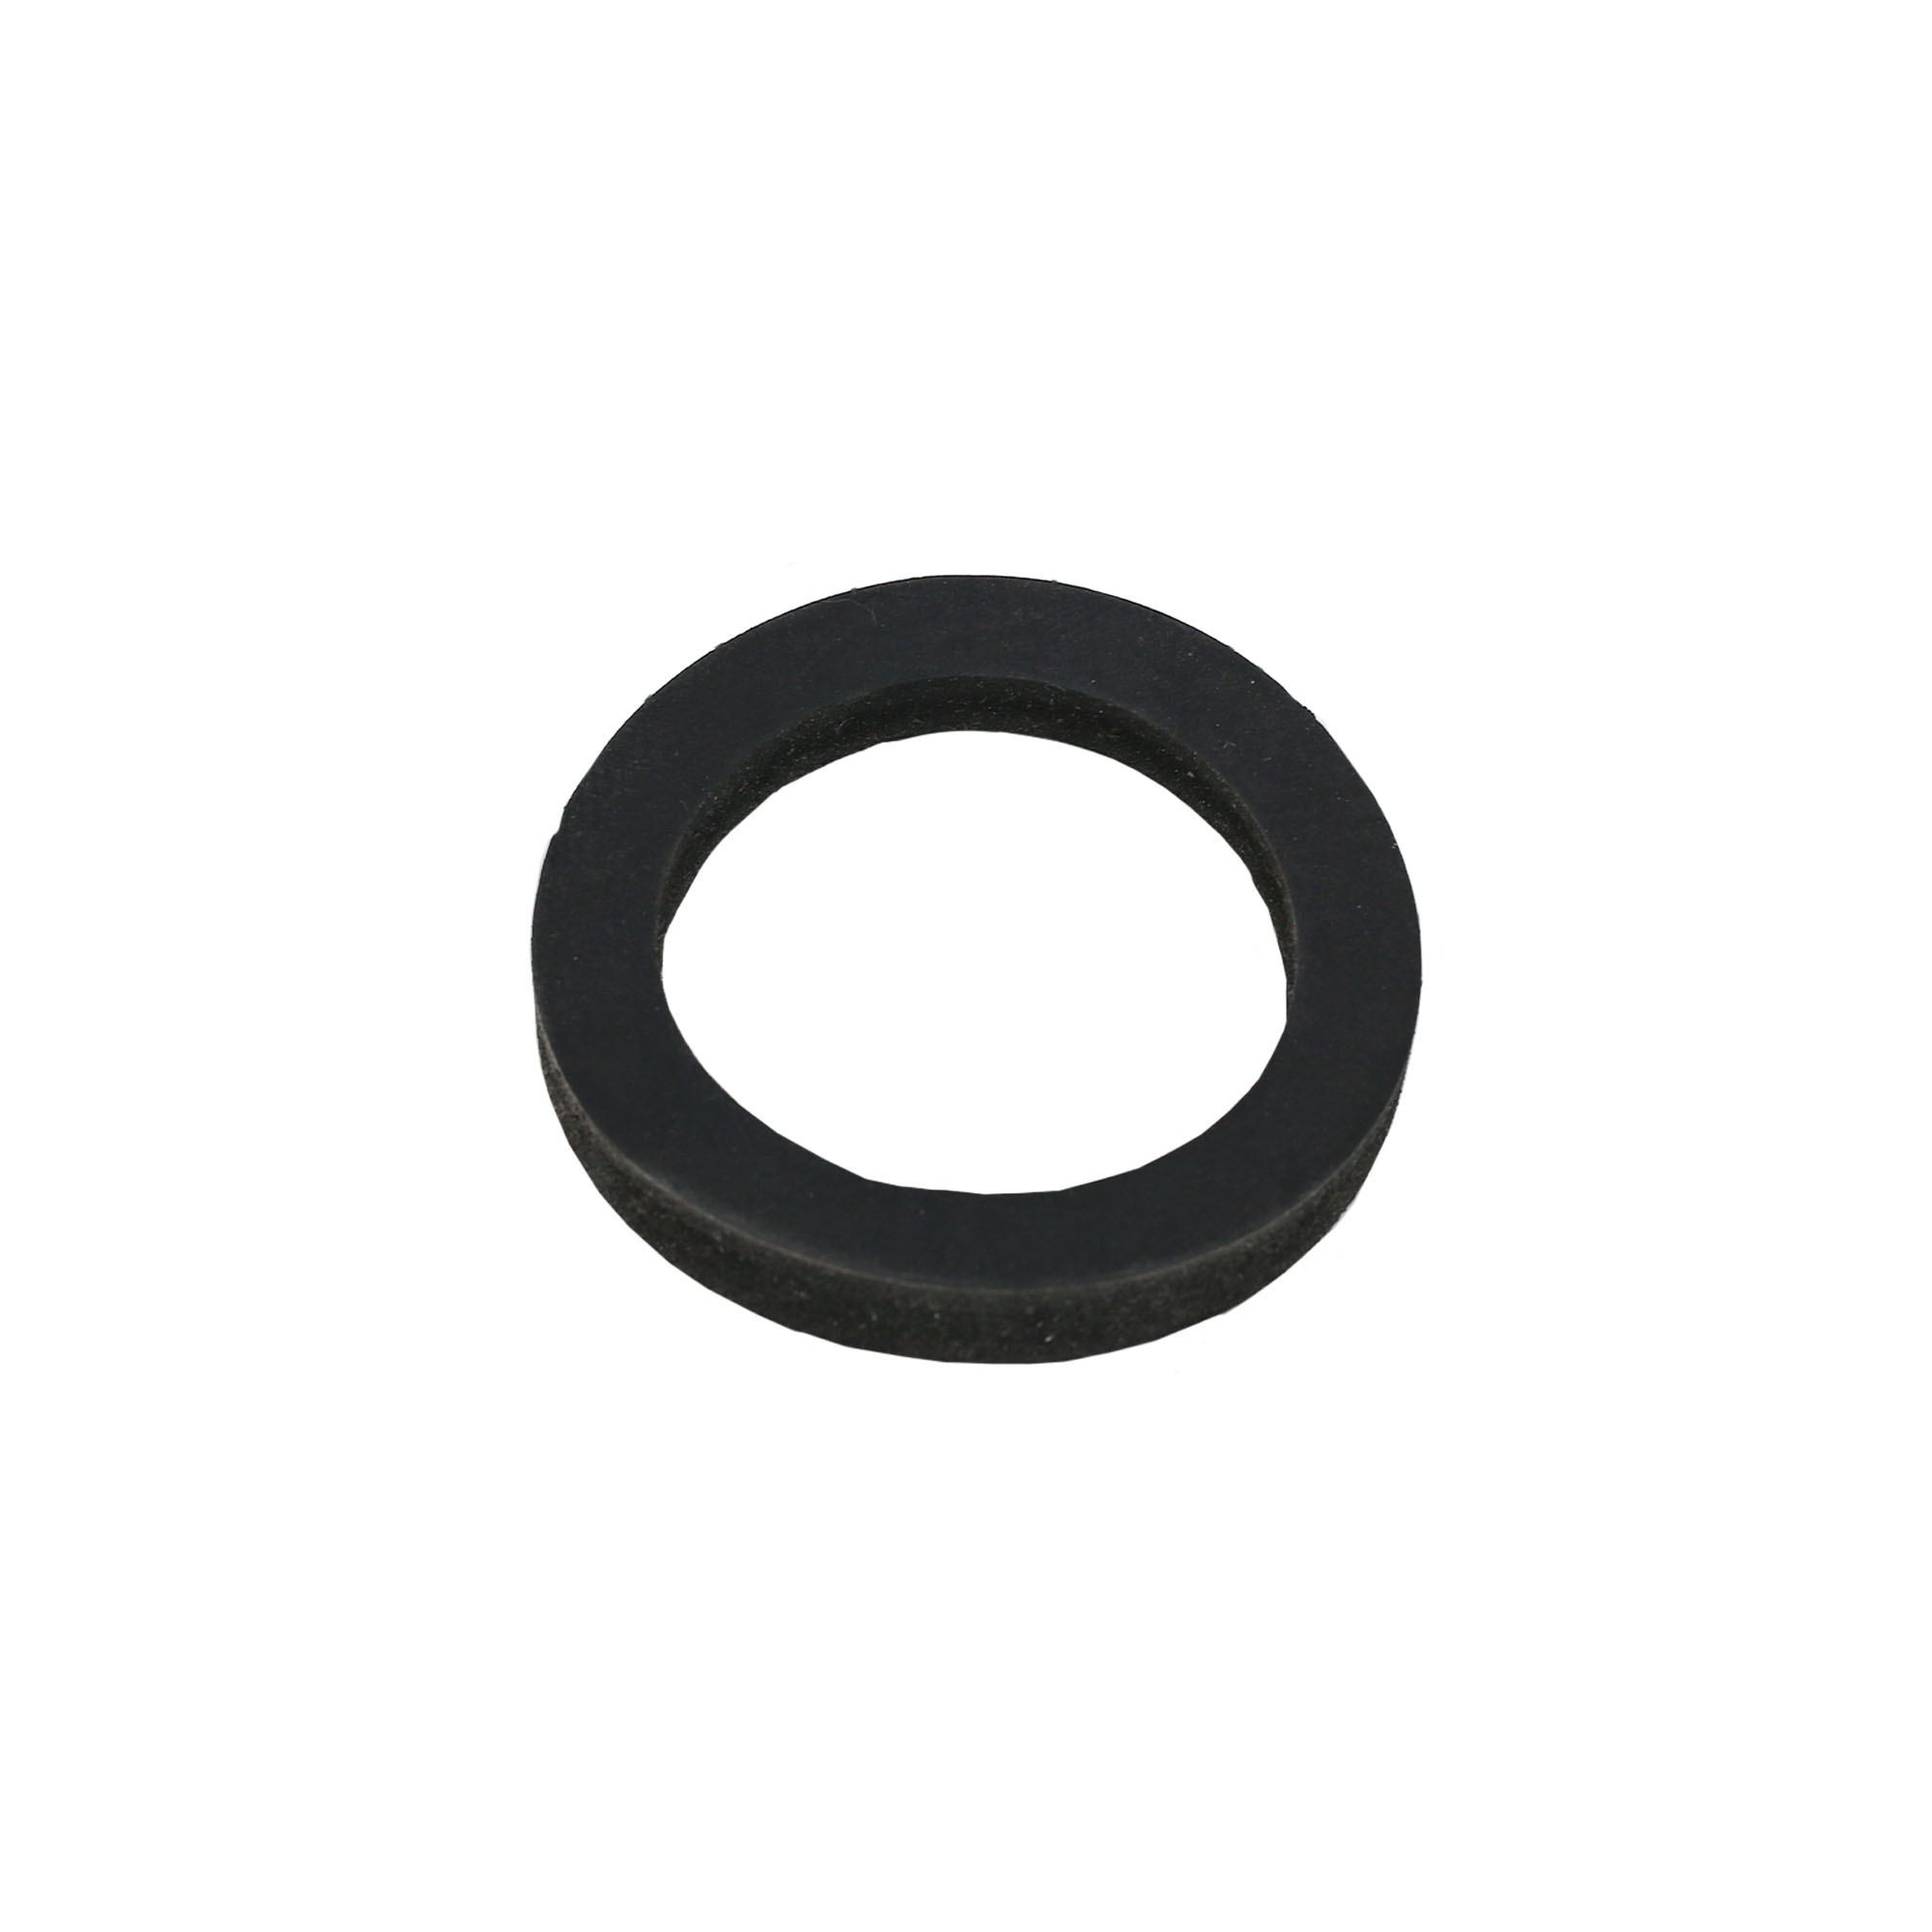 Portable Blaster Parts, Parts Washer Replacement Parts, Parts & Accessories, Donut Gasket for Pressure Blaster, 199 Donut Gasket, American Hawk Industrial, Dee-Blast